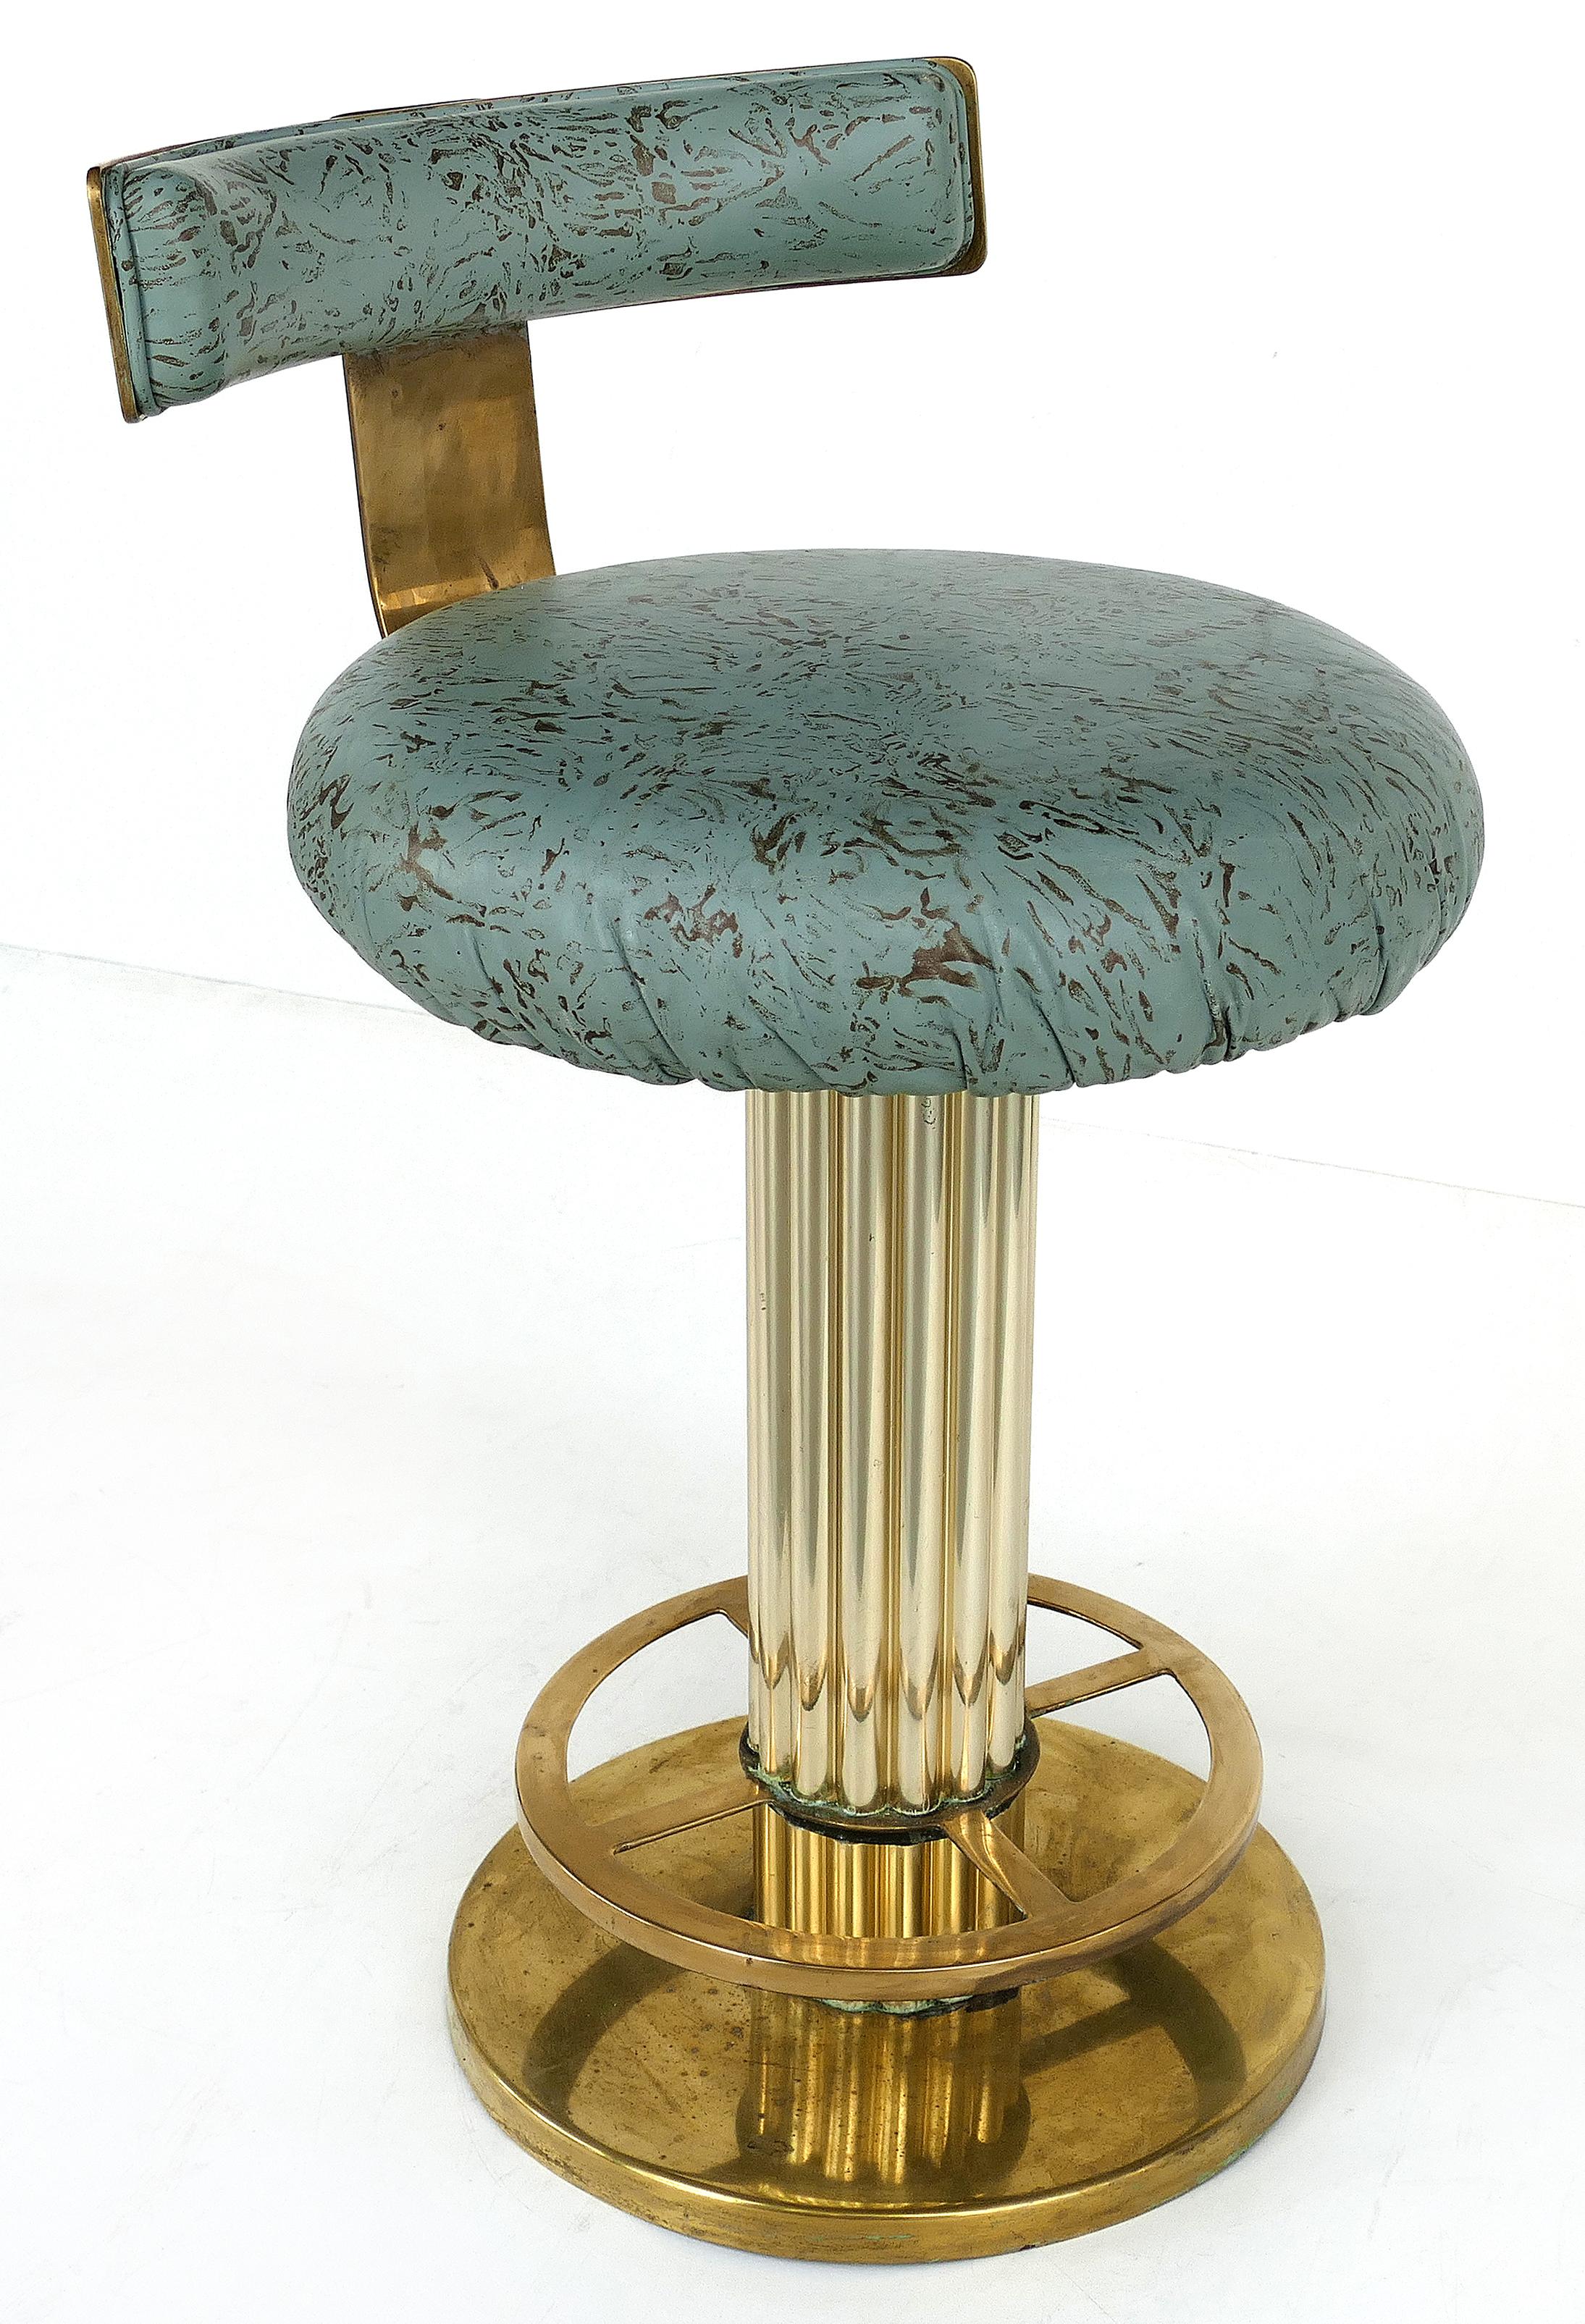 Modern Design for Leisure Ltd. Brass Swivel Counter Stools with Leather Seats